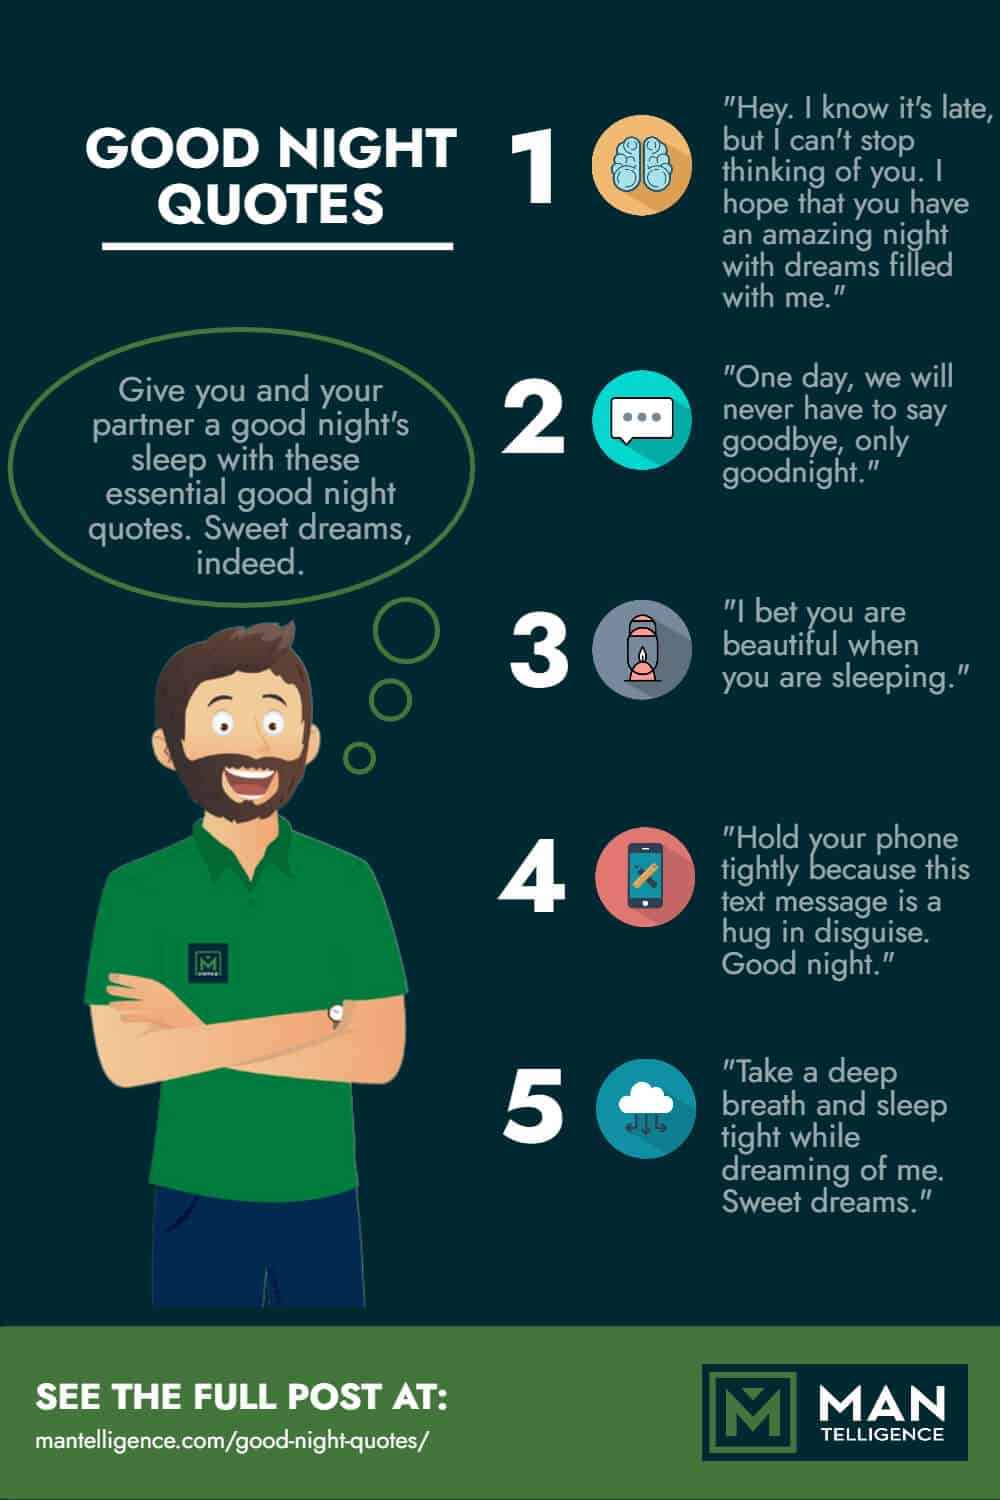 Good Night Quotes - infographic